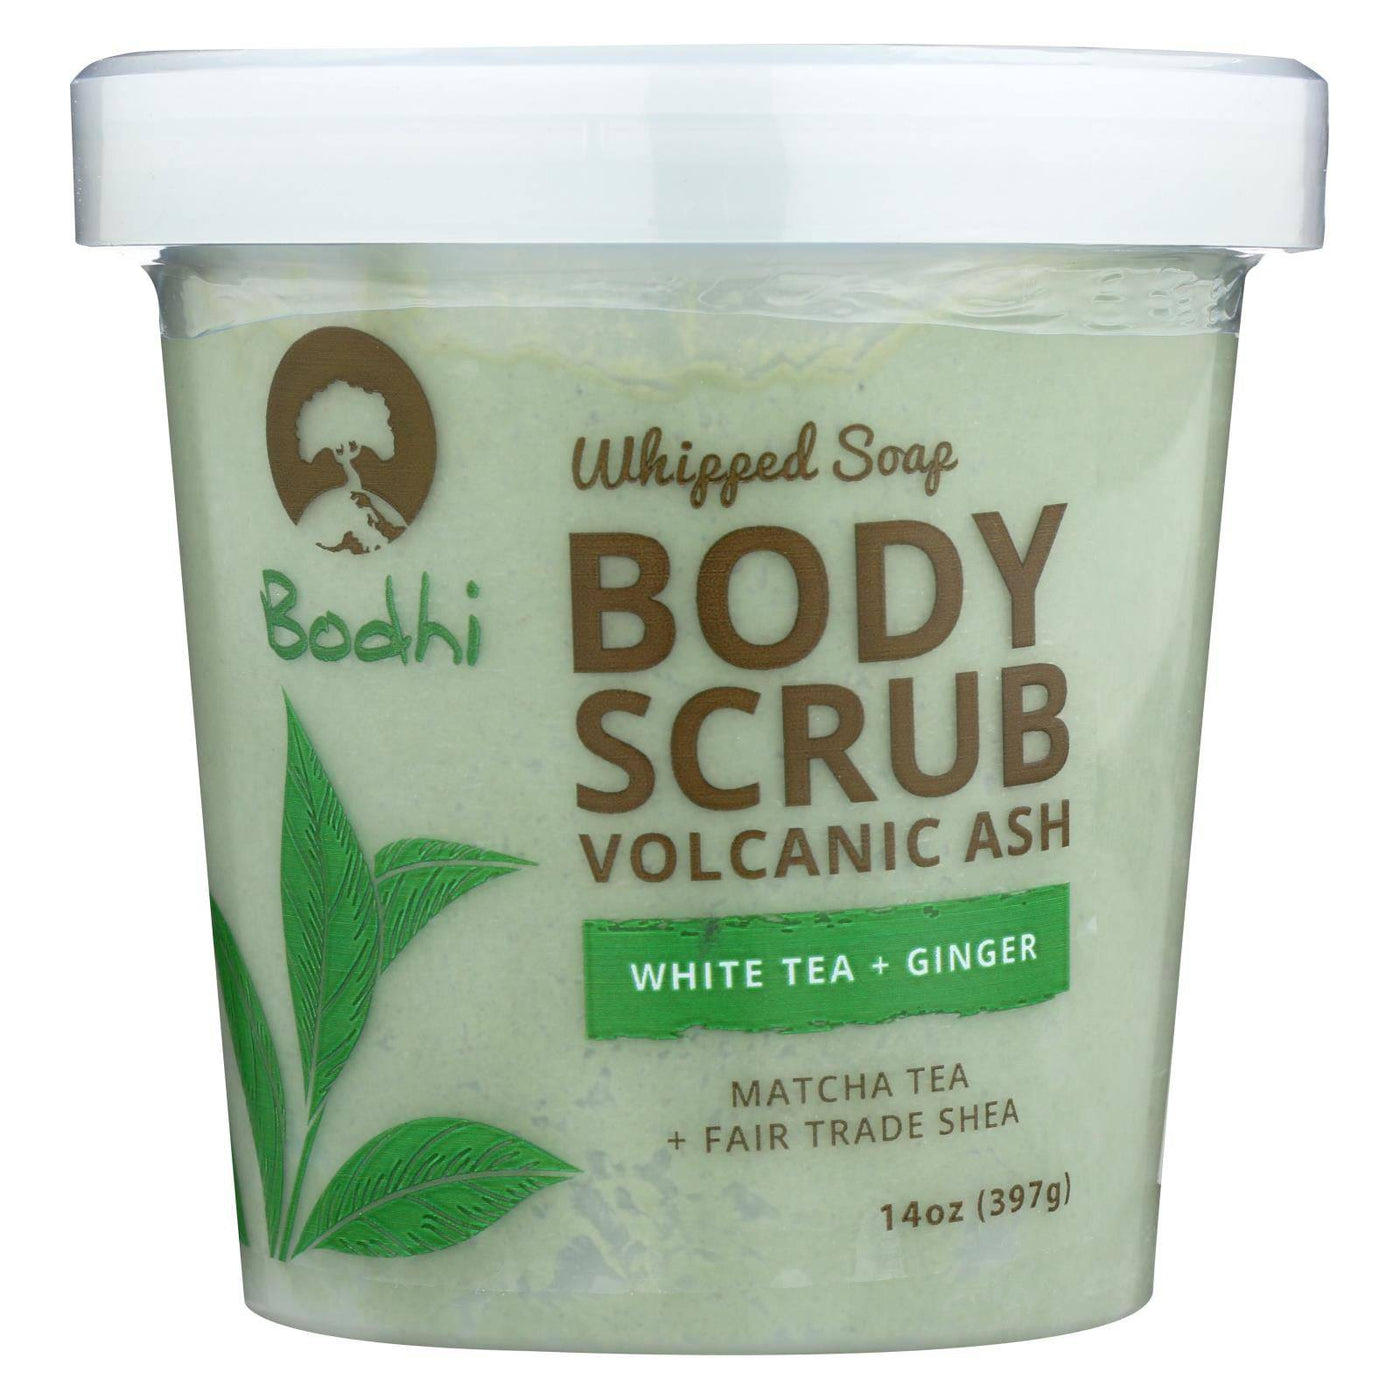 Bodhi - Body Scrub - White Tea And Ginger - Case Of 1 - 14 Oz. | OnlyNaturals.us